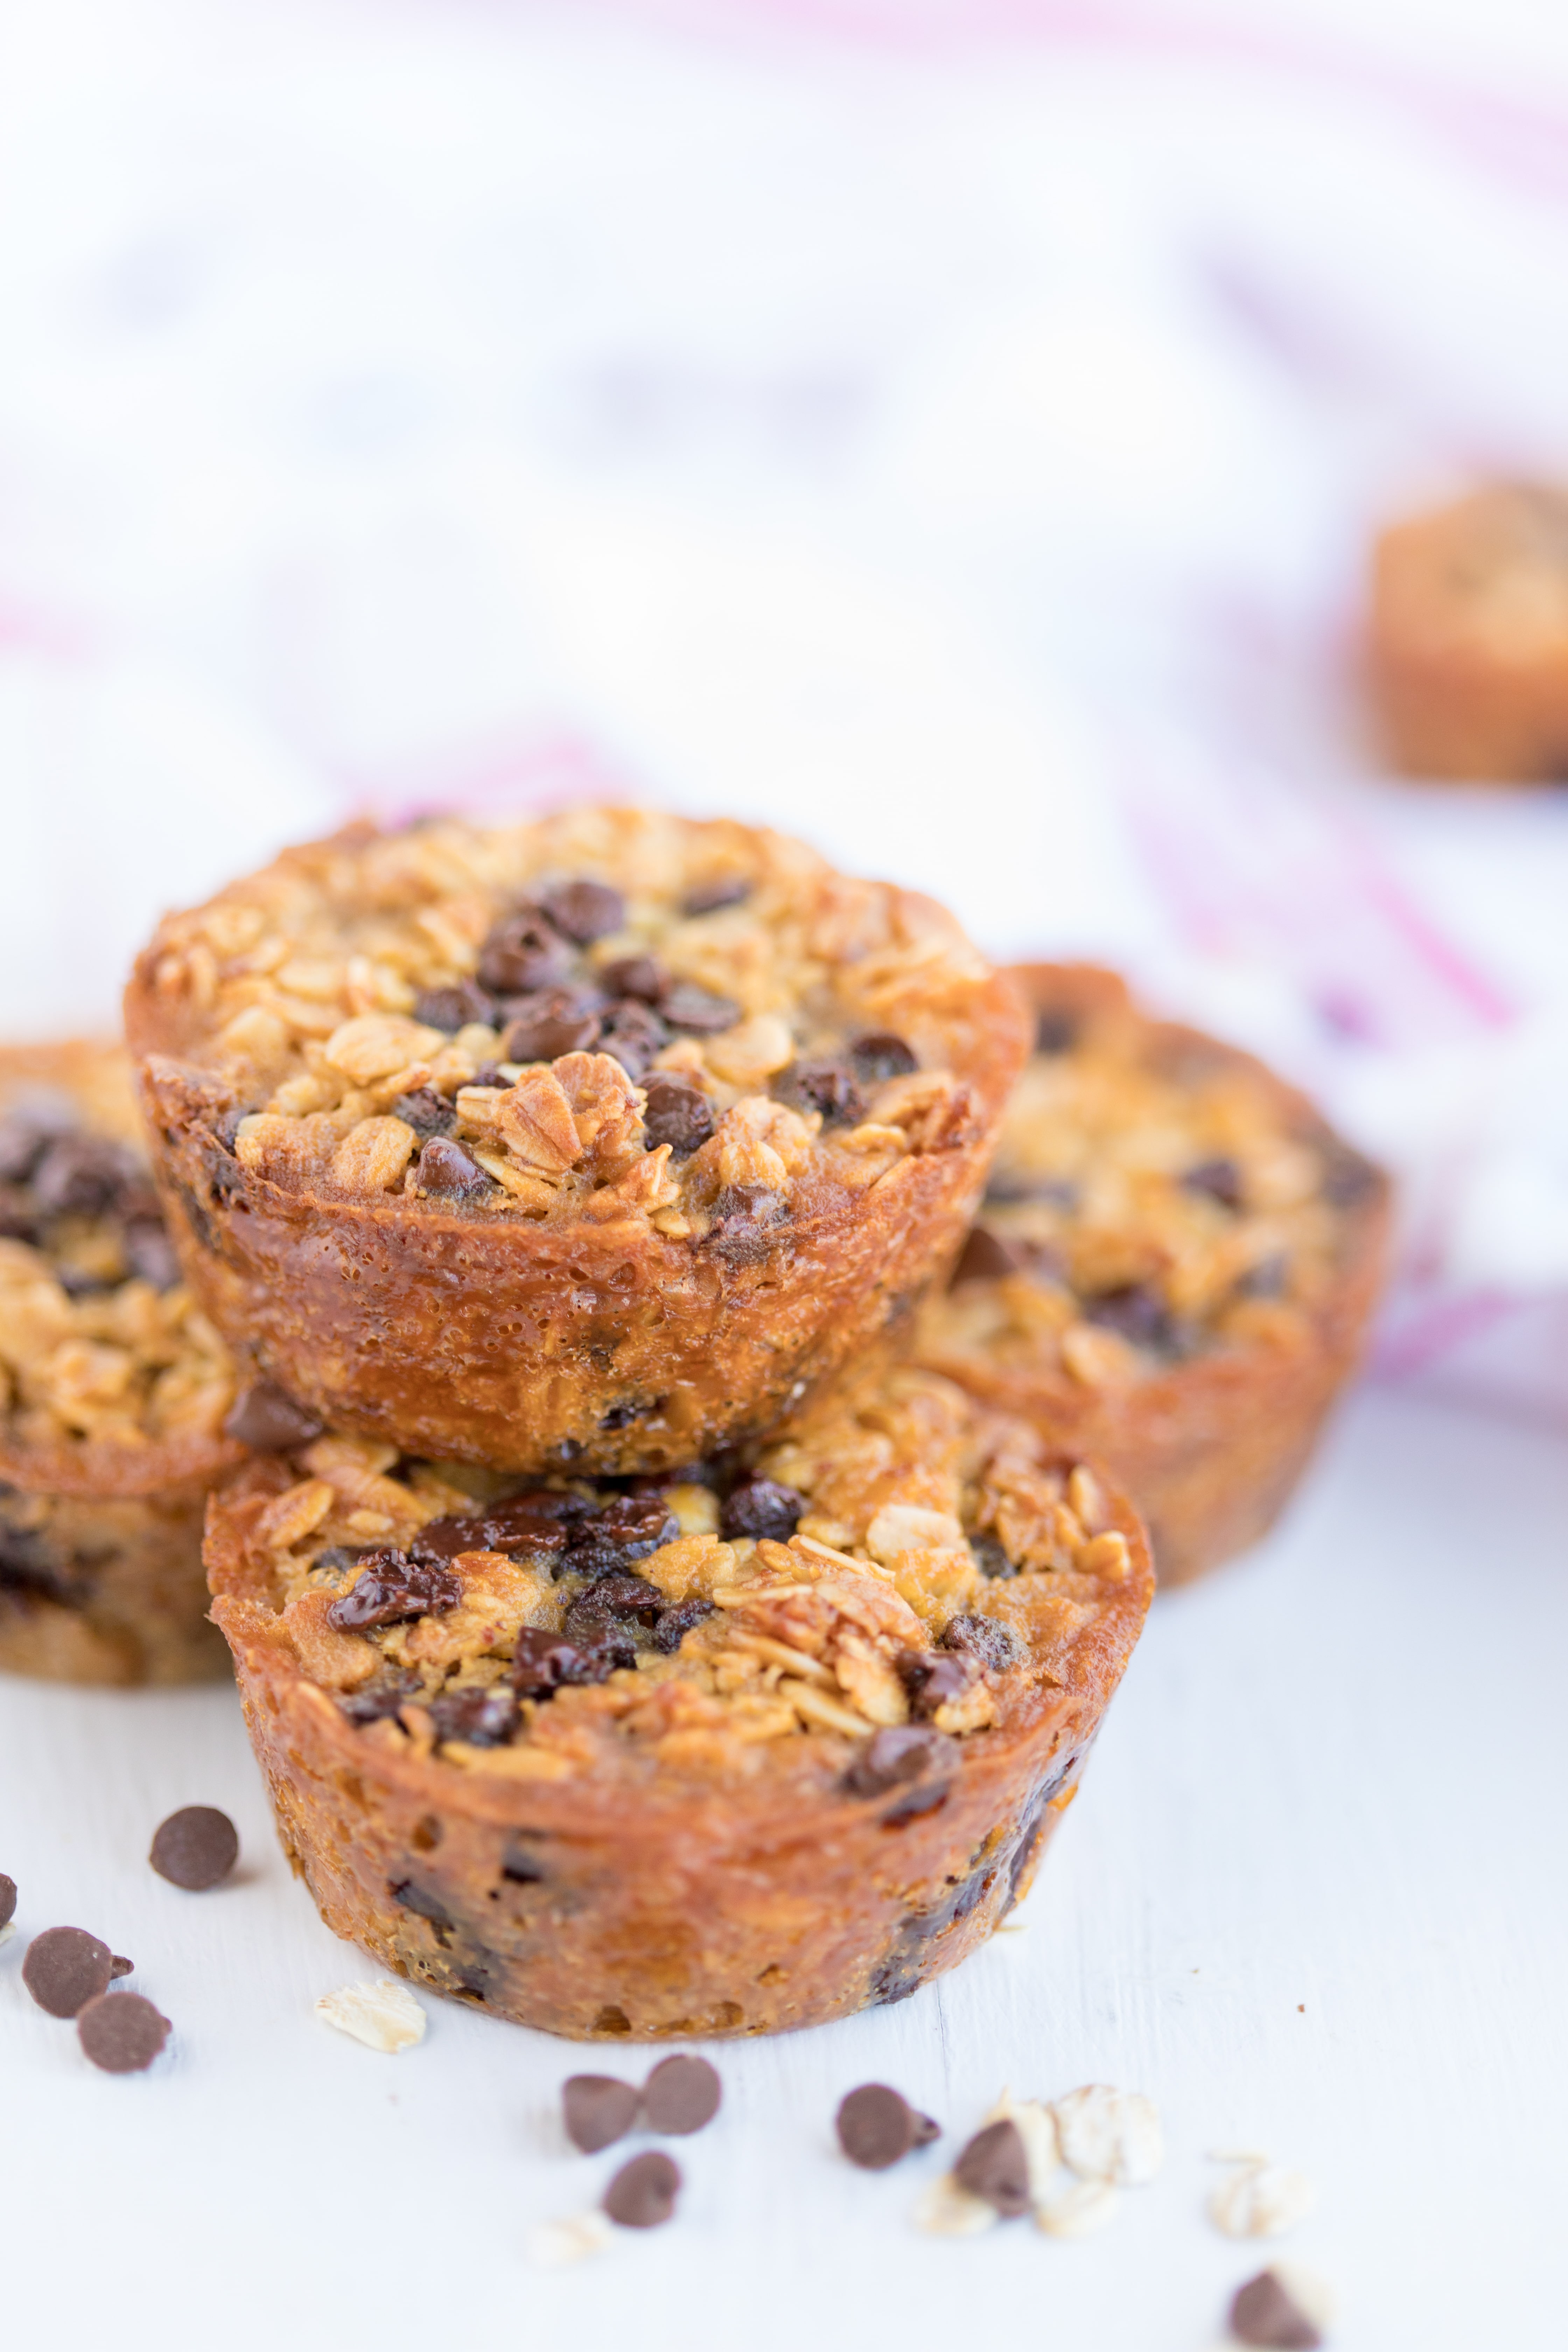 stack of 4 baked oatmeal chocolate chip breakfast cups with scattered chocolate chips